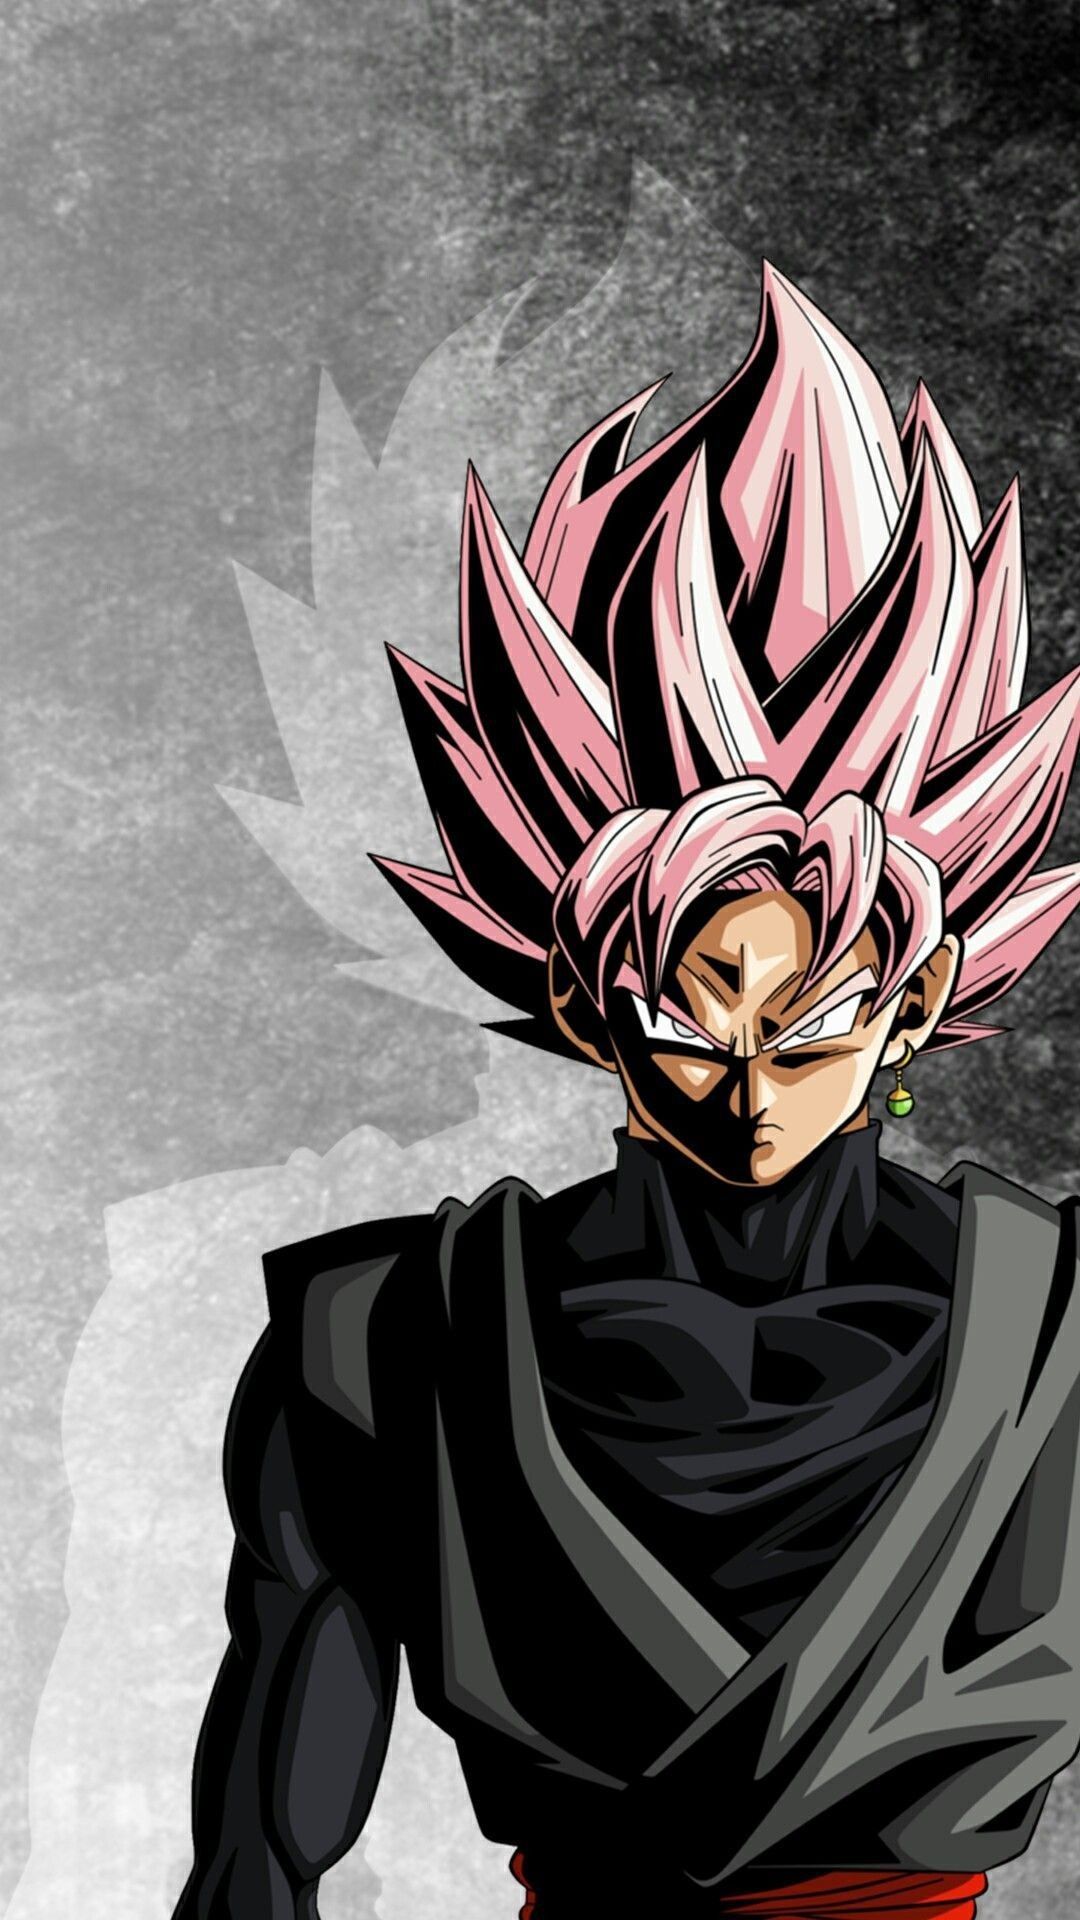 Goku Black Wallpaper 4k Android Hd Wallpaper Dragon Ball Dragon Ball Super Black Goku Wallpaper Flare If You Re Looking For The Best Goku Black Wallpapers Then Wallpapertag Is The Place